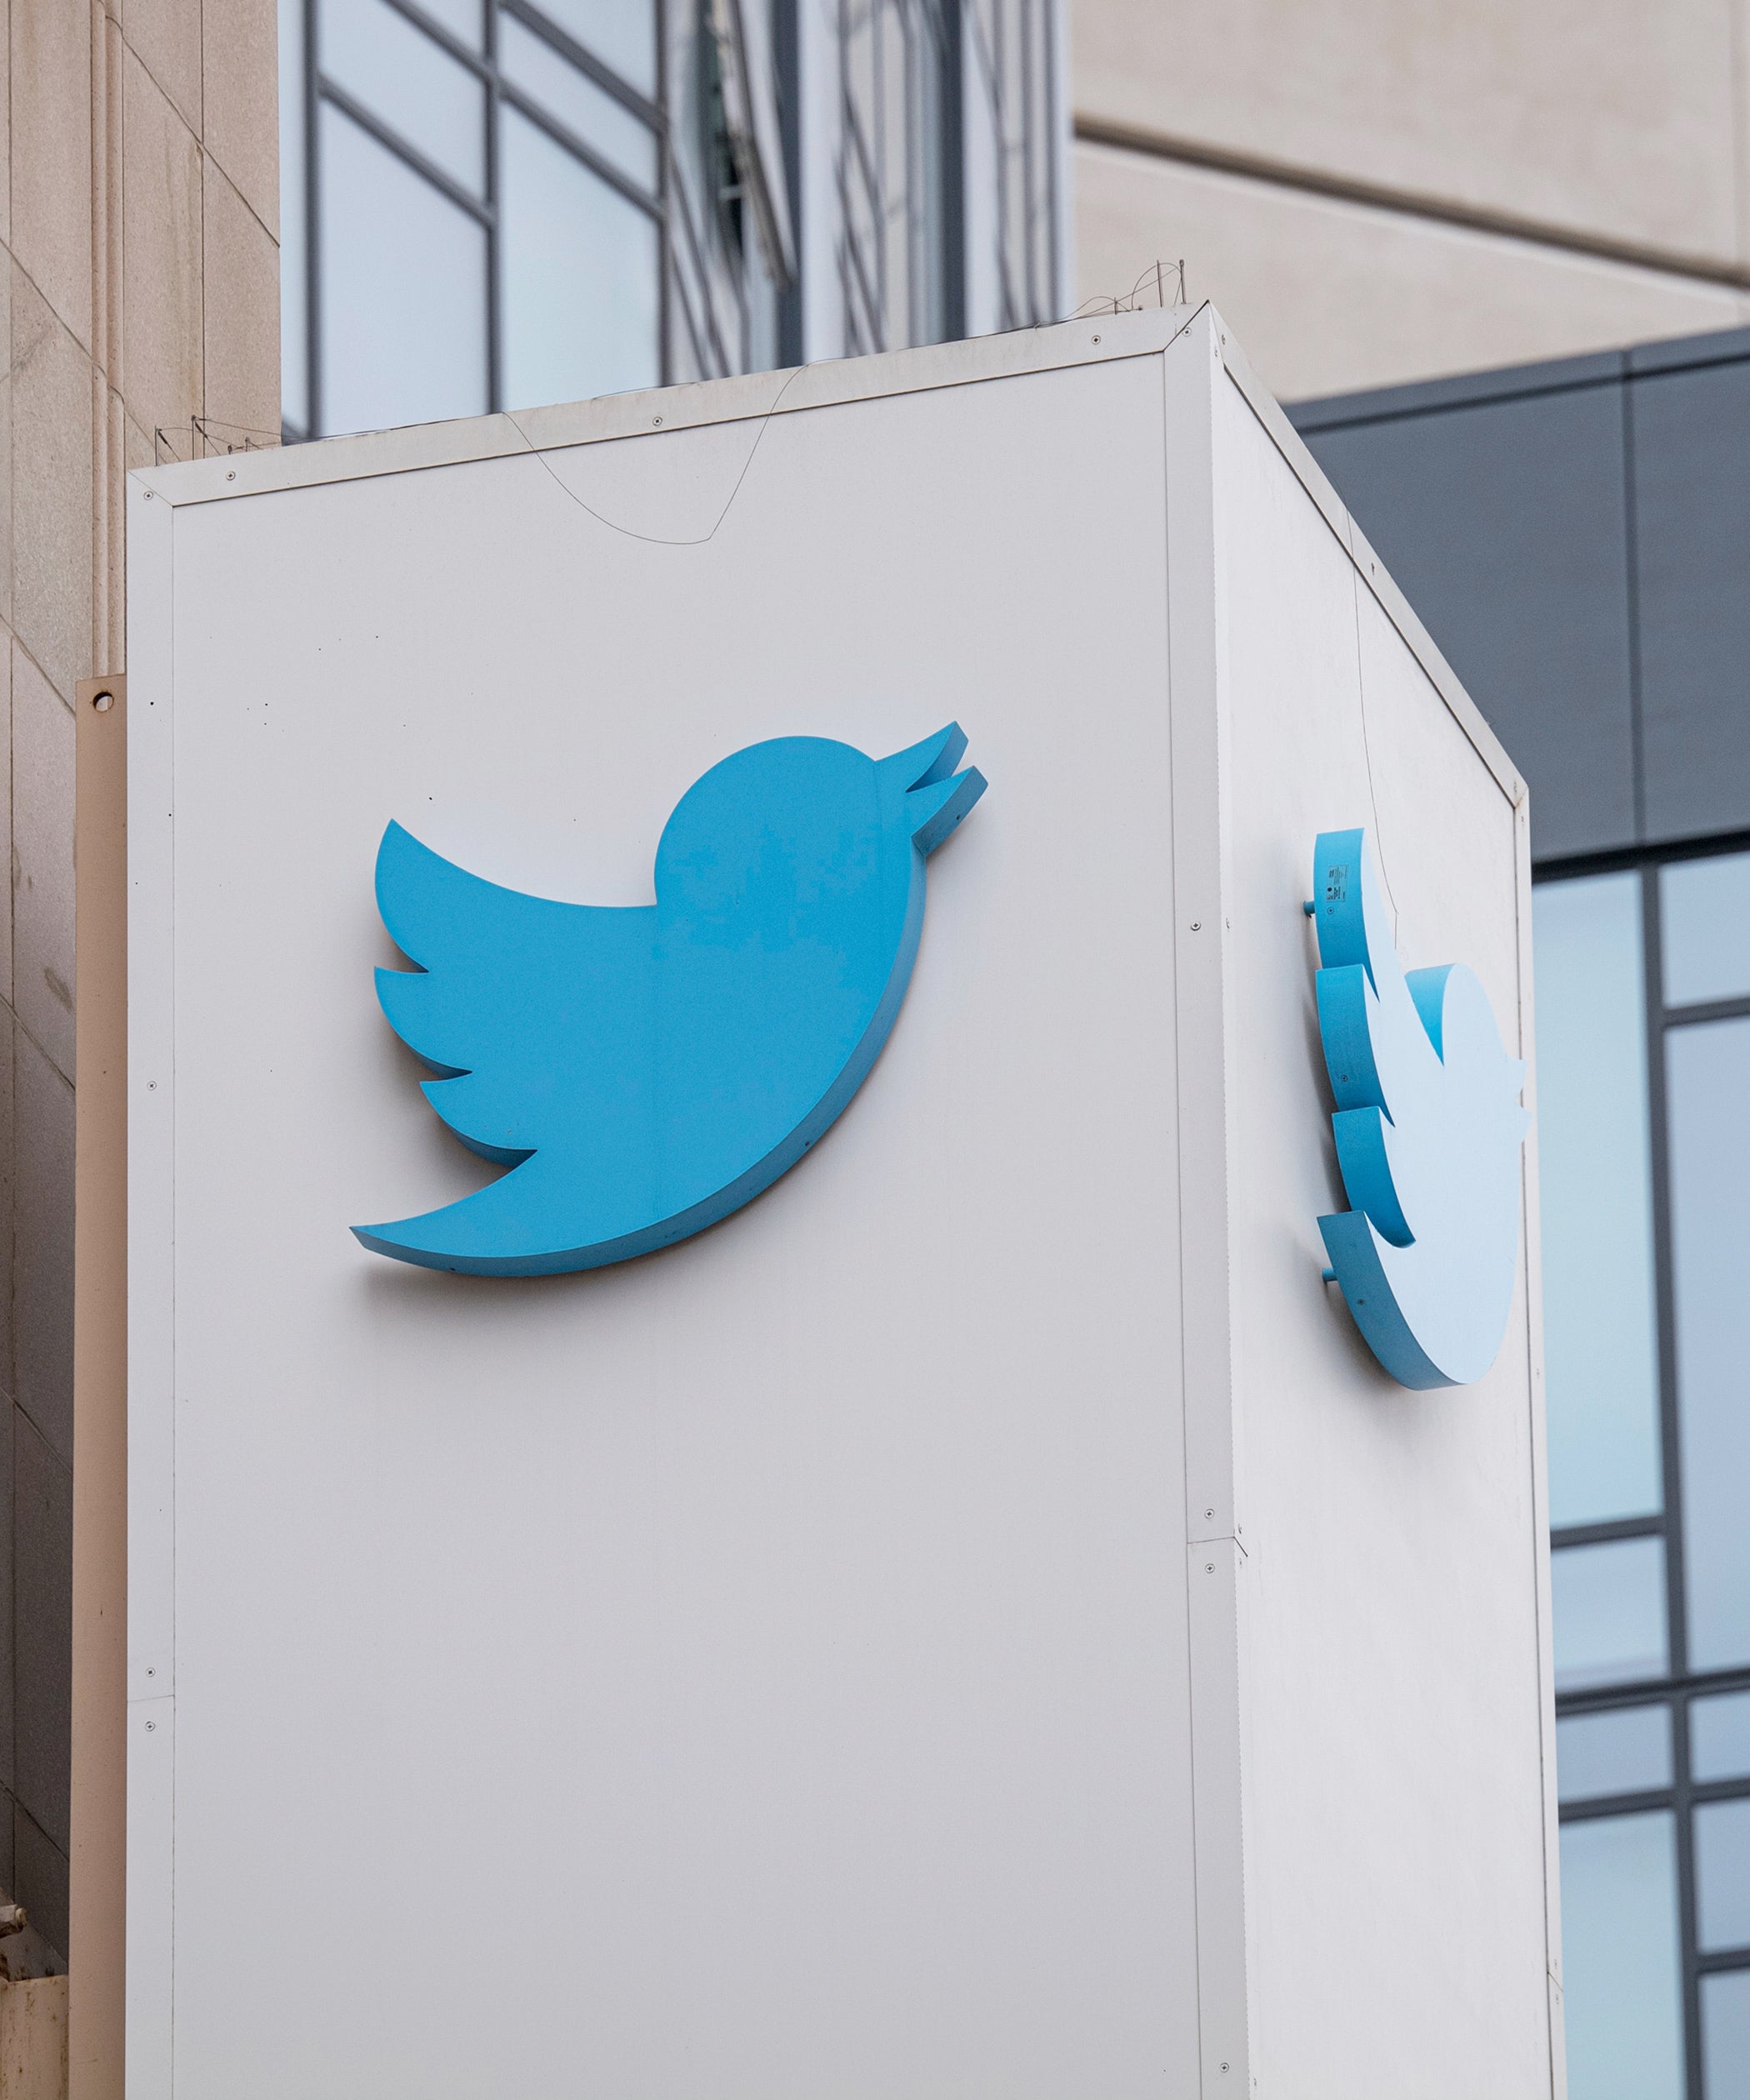 Twitters Photo Preview Generator Shows Racial Bias